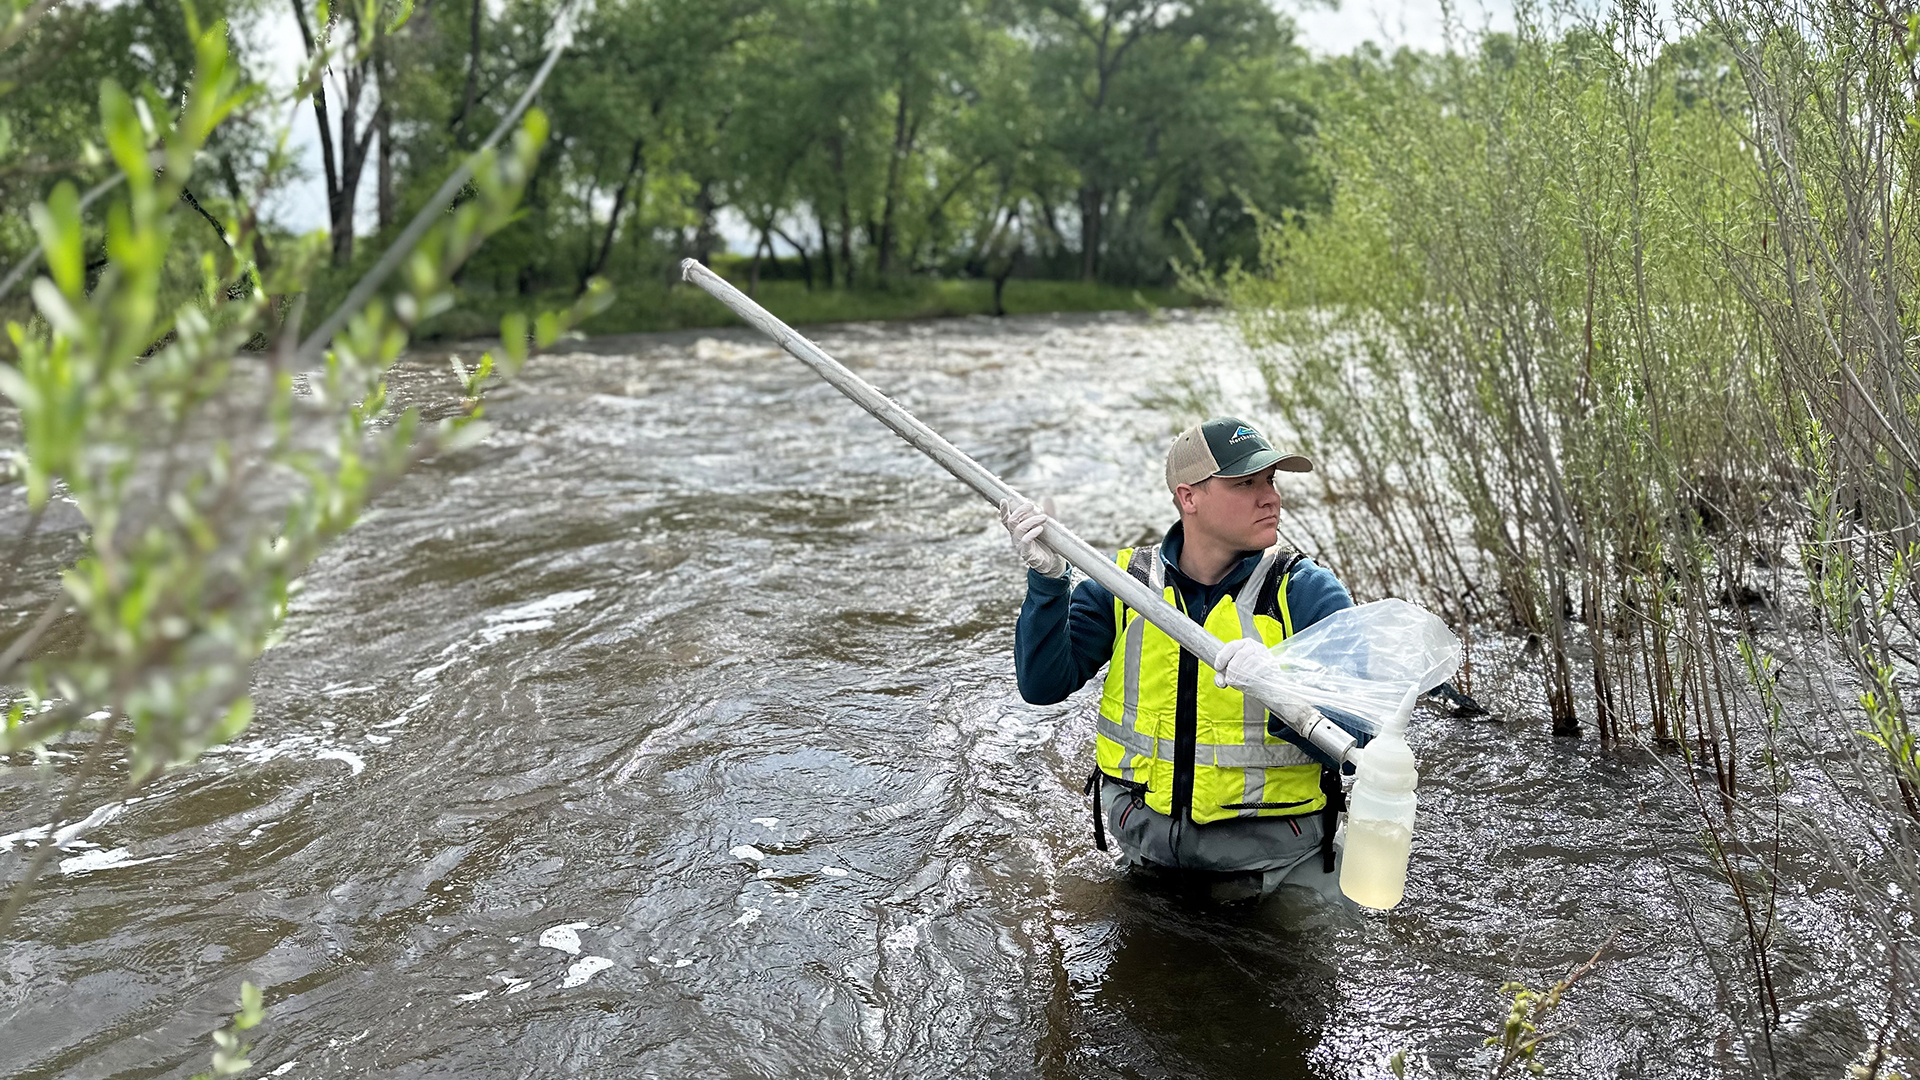 Employee in the river in waders collecting water samples